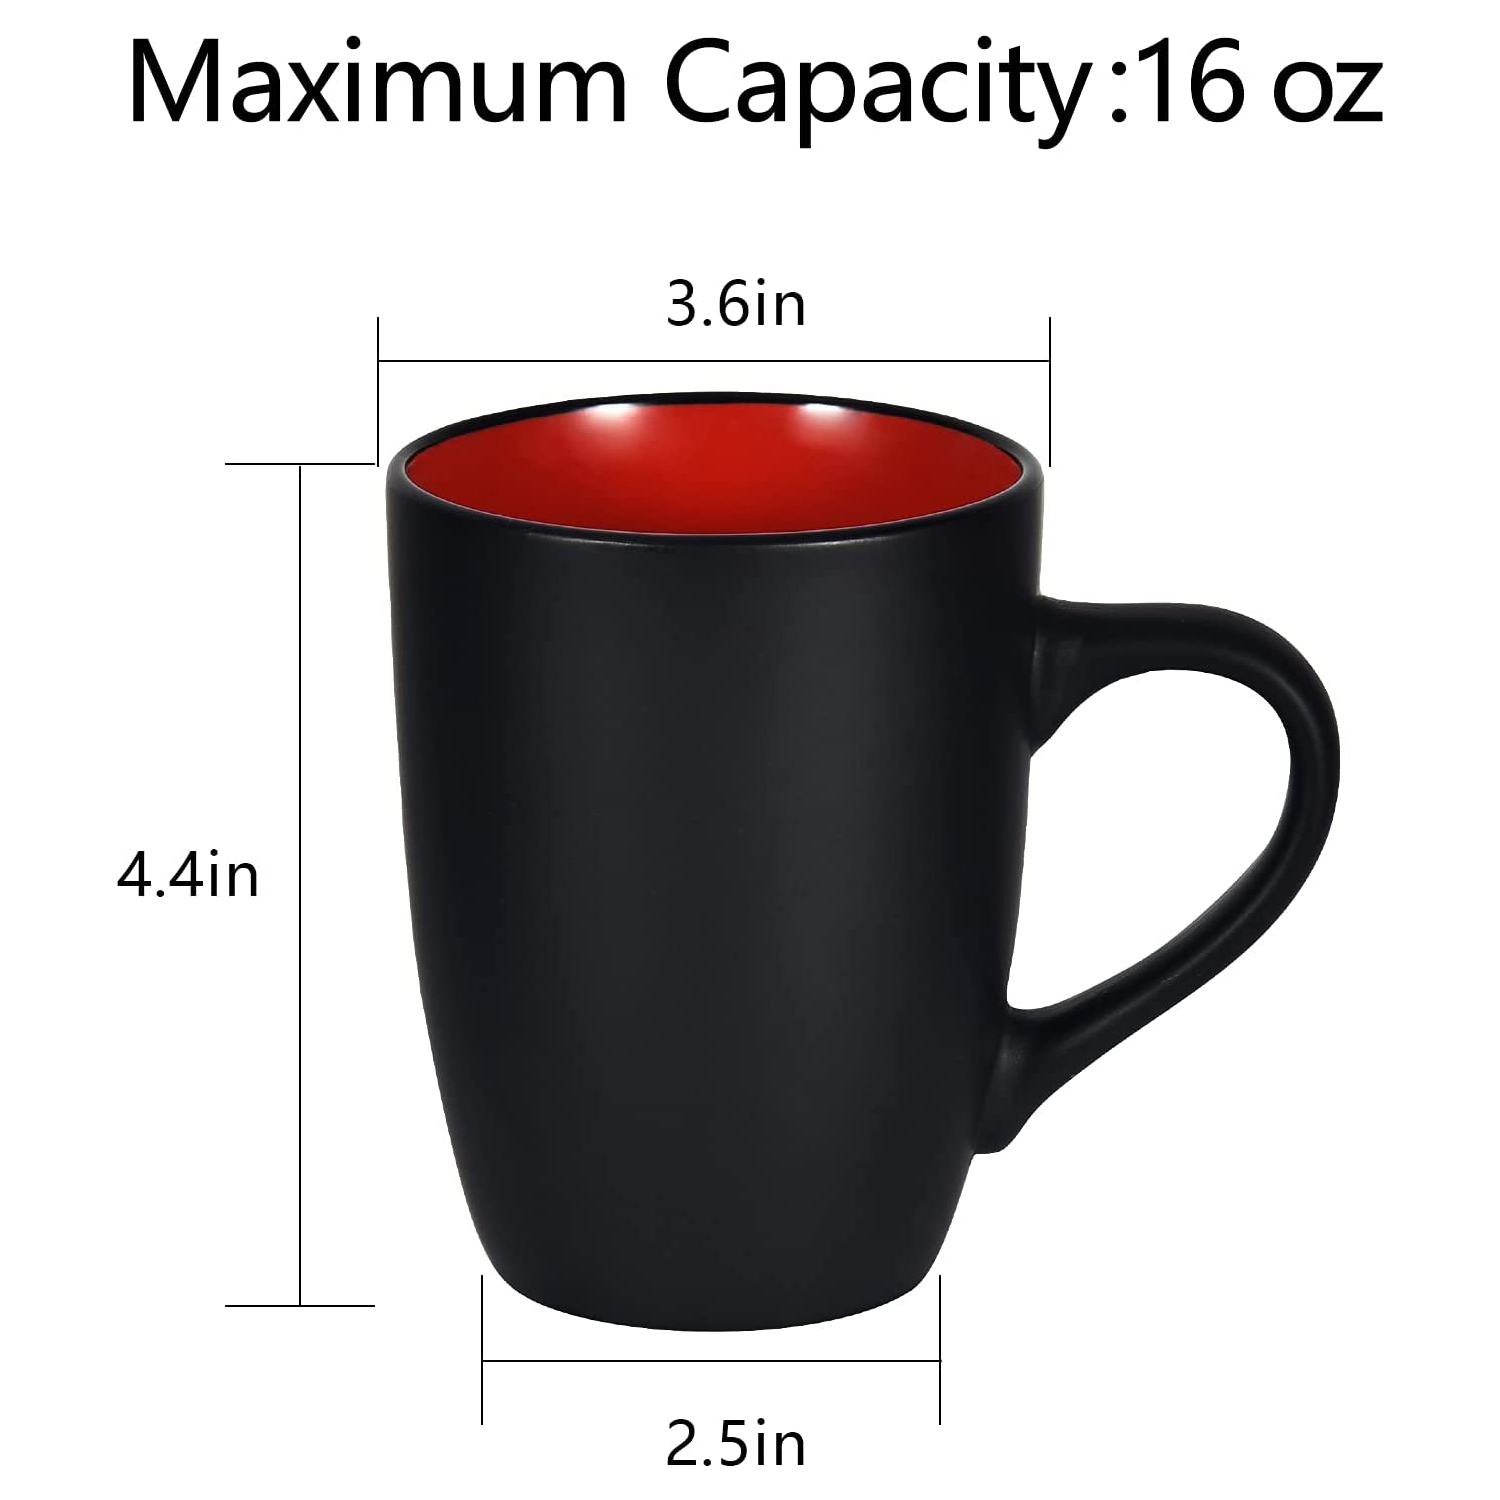 Modwnfy 16 fl oz Red Coffee Mugs Ceramic Coffee Mug Tea Cups, Black Exterior Red Color Interior Ceramic Coffee Mugs, Large Ceramic Coffee Cup for Coffee, Tea, Cocoa, Cereal, Office and Home - image 2 of 10